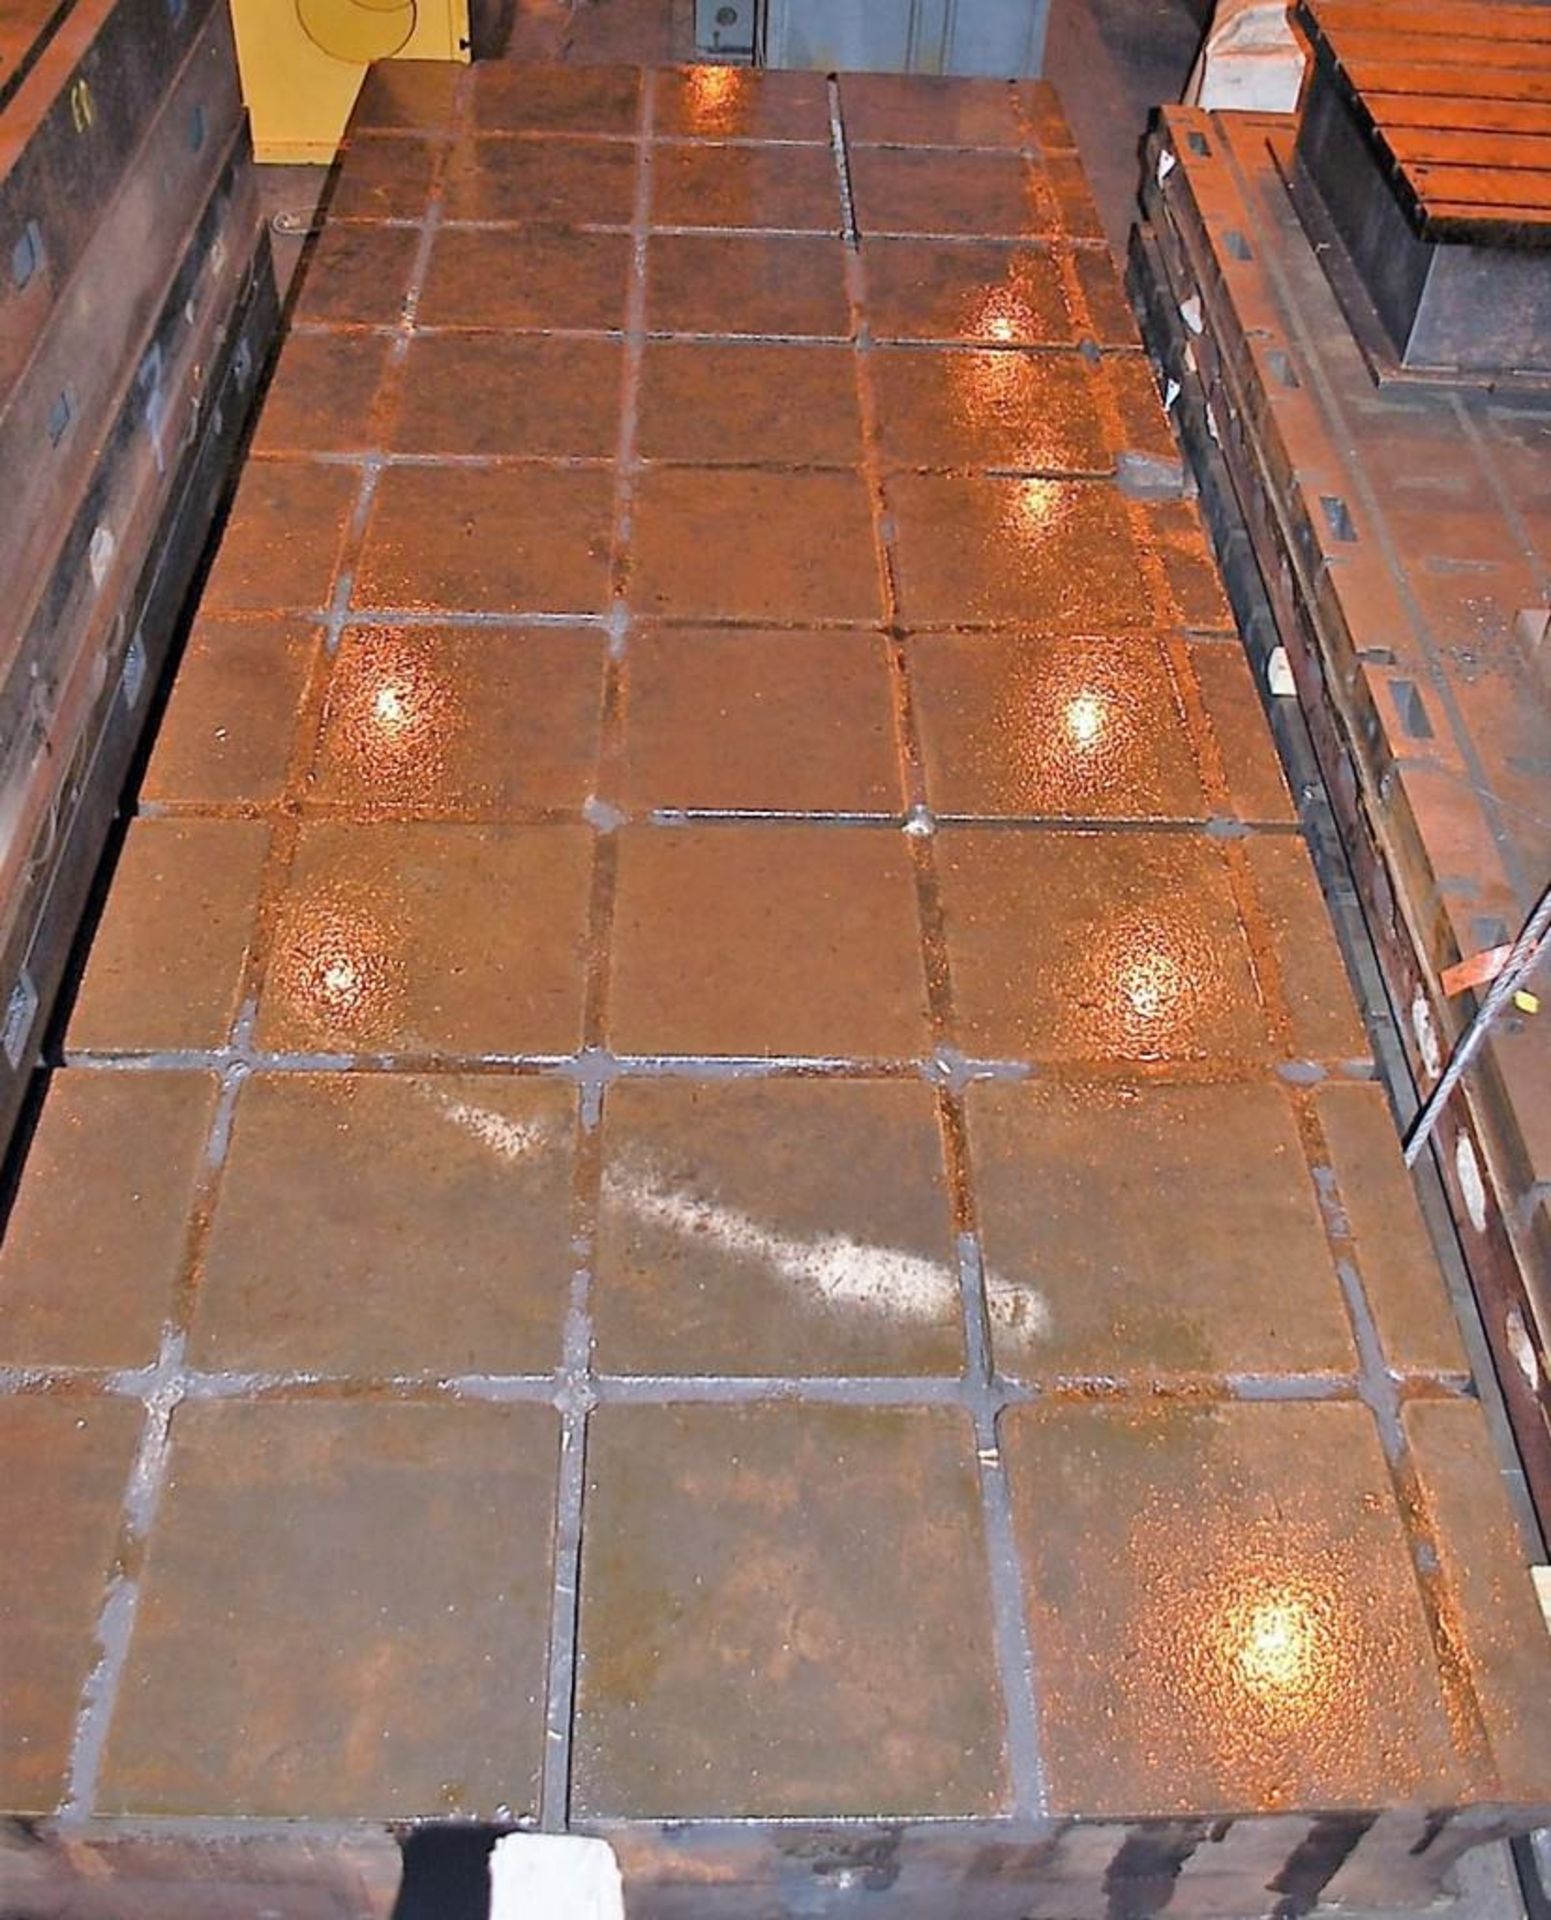 T-Slotted Cast Iron Floor Plate, 215" x 90" x 19" - Image 2 of 6